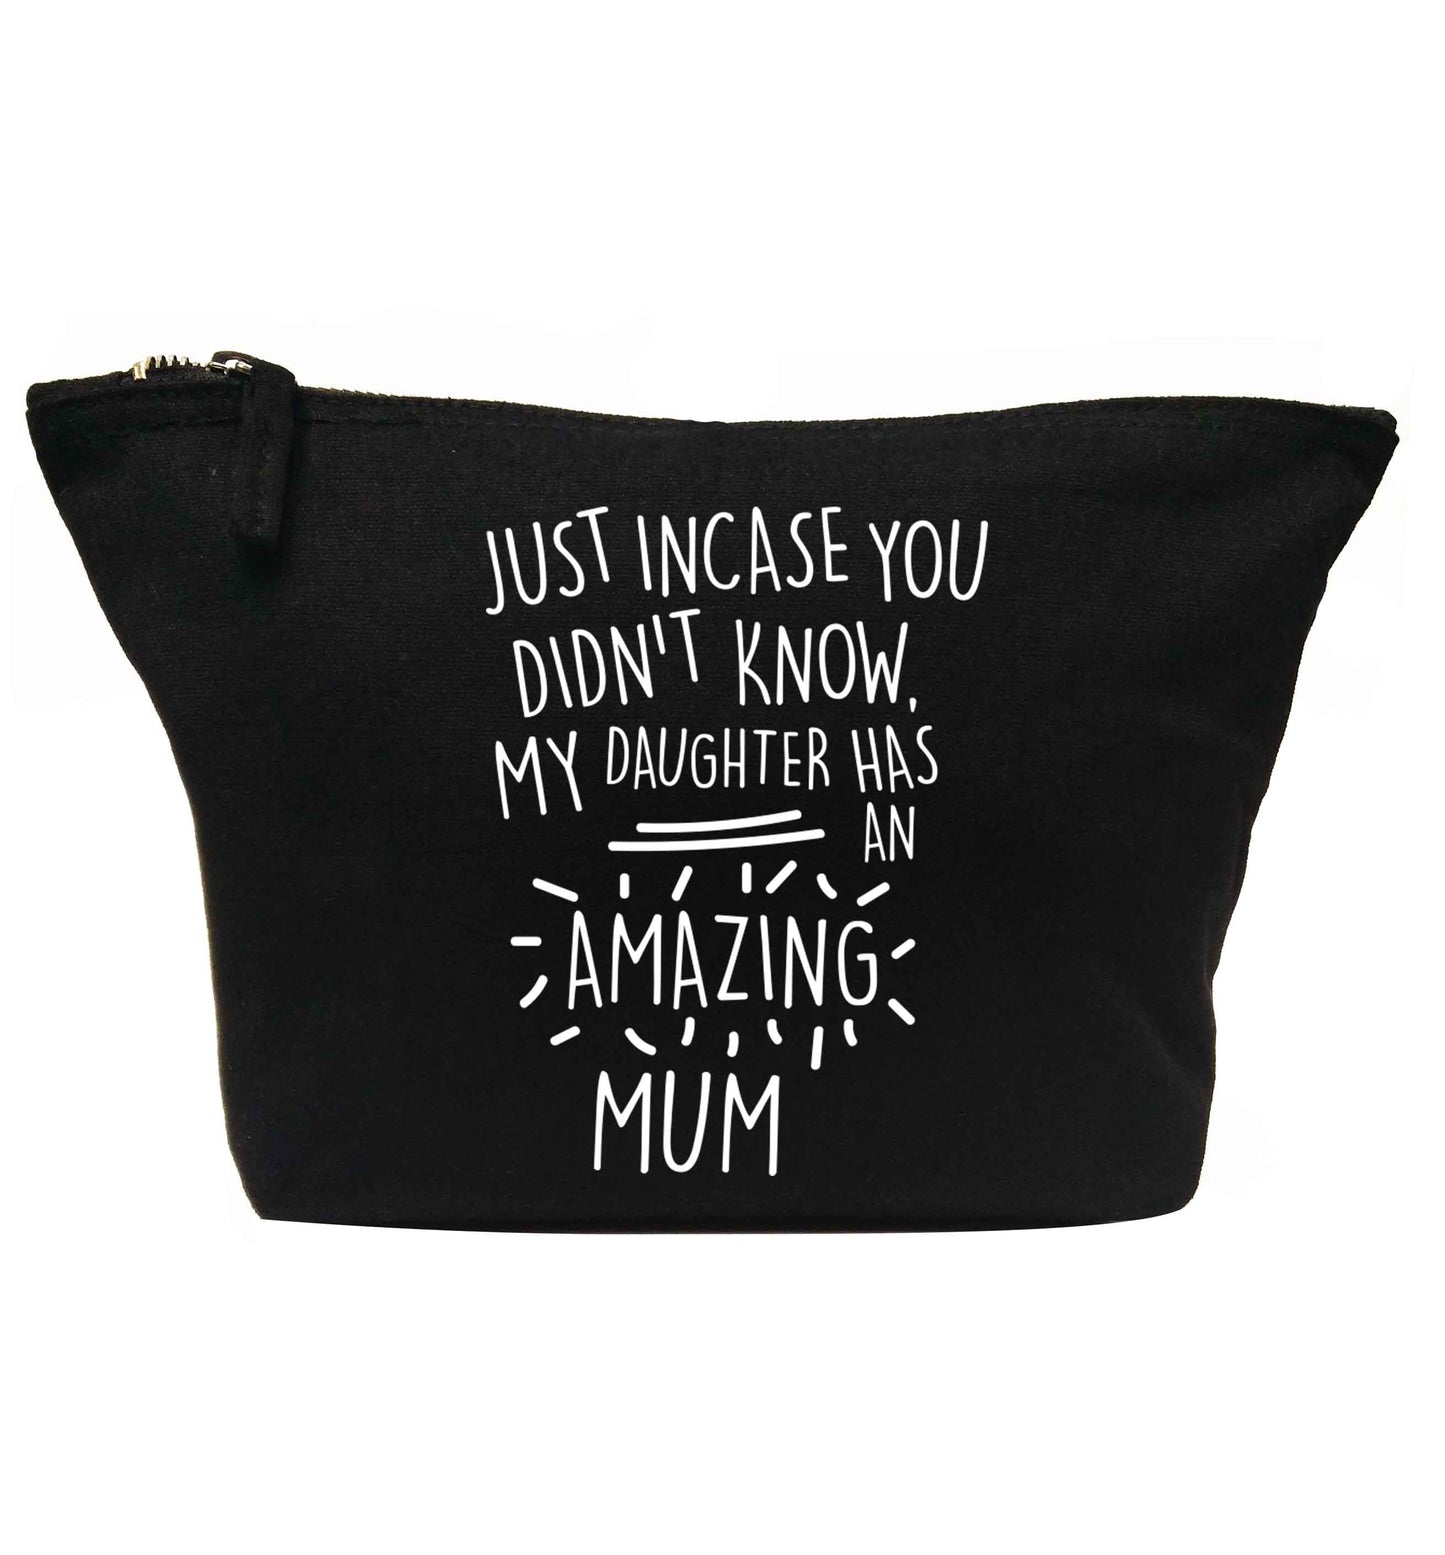 Just incase you didn't know my daughter has an amazing mum | Makeup / wash bag